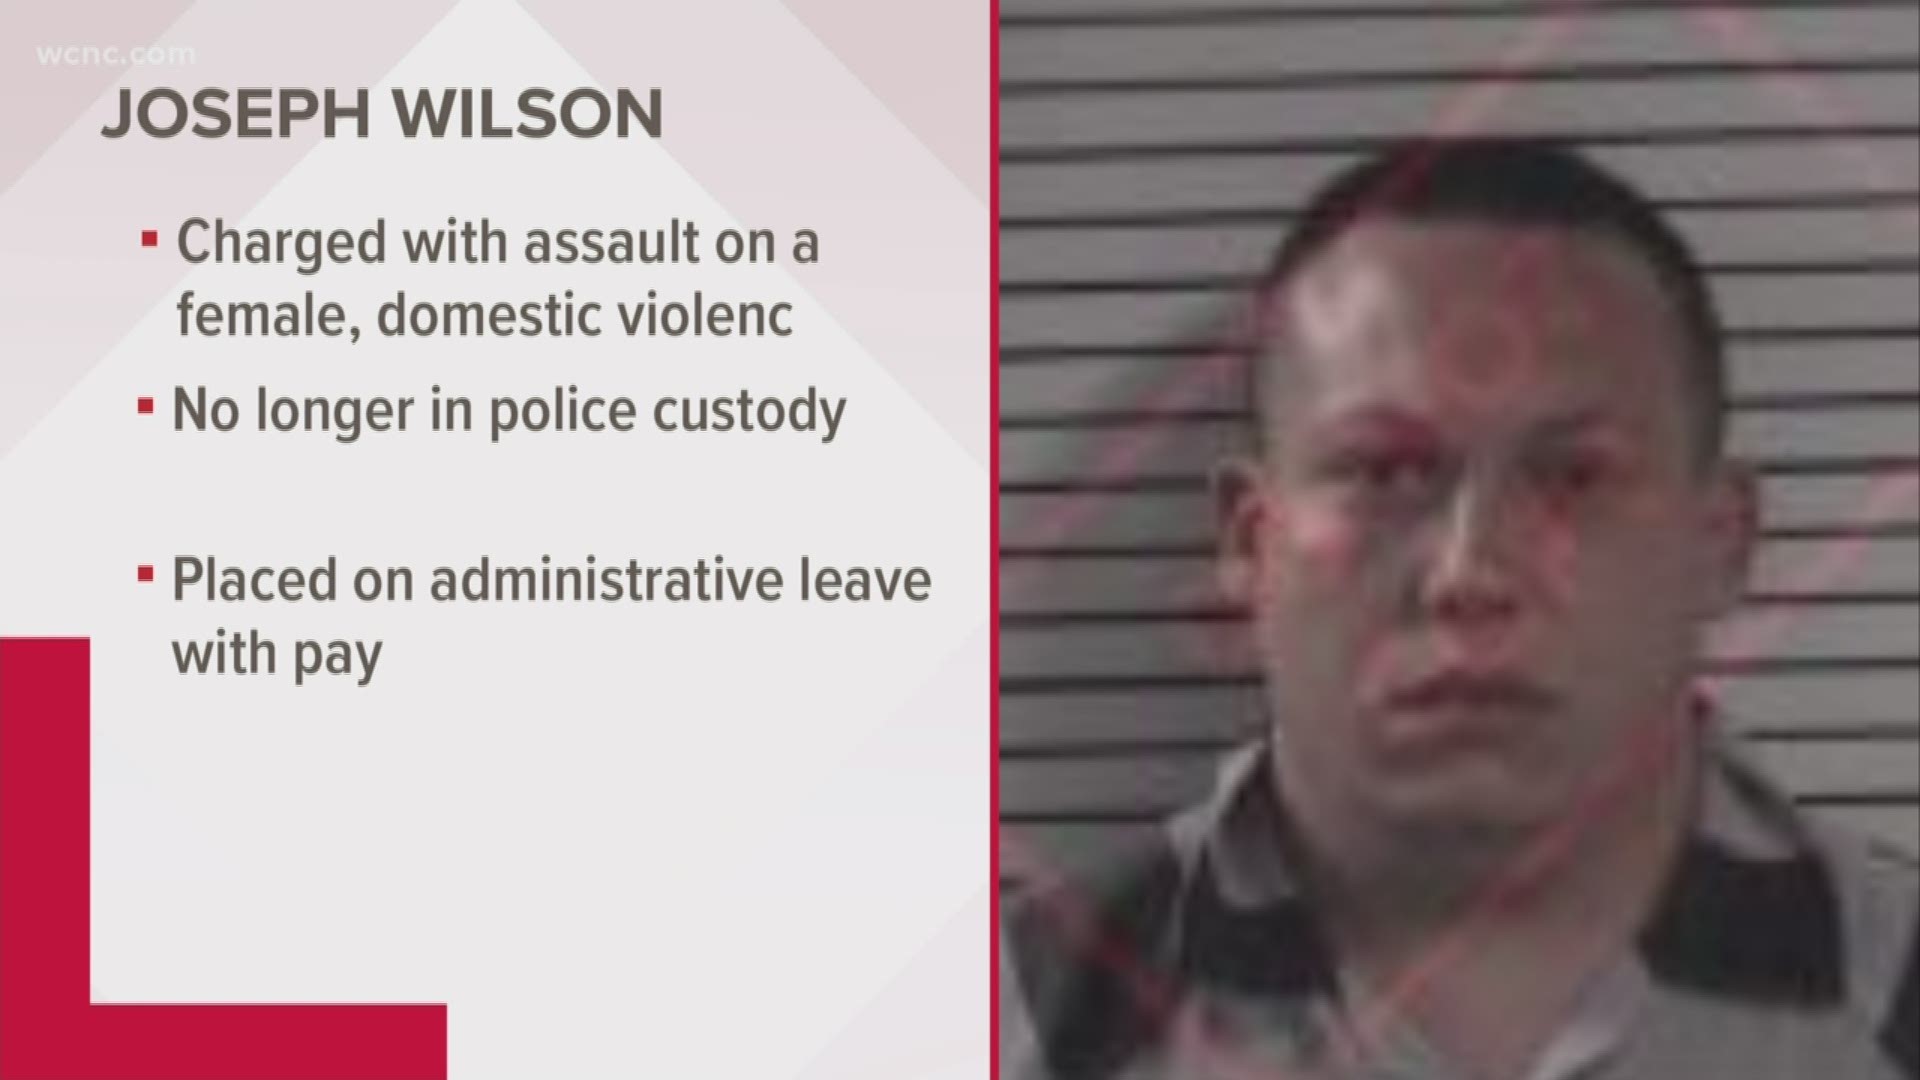 Officer Joseph Wilson was taken into custody on Friday evening and charged with assault on a female. He has since been released on bond but has been placed on administrative leave with pay pending further inquiry by the Salisbury Police Department.